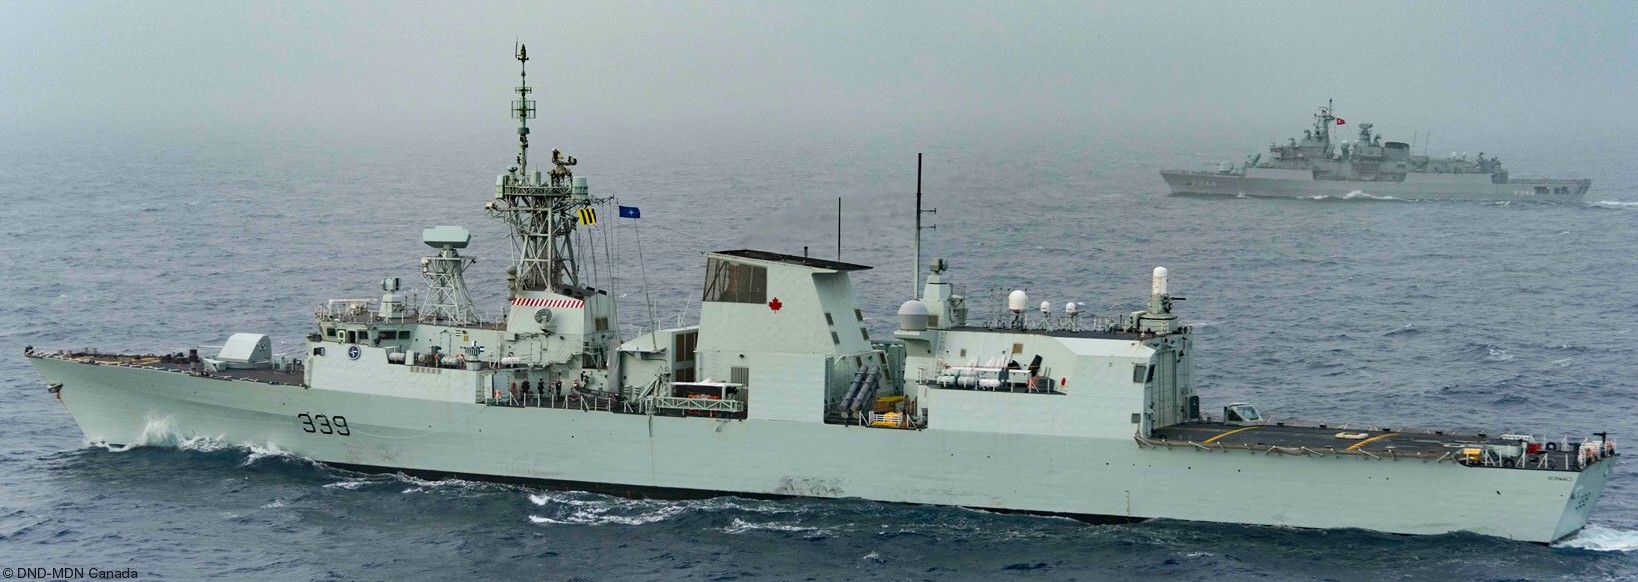 ffh-339 hmcs charlottetown halifax class helicopter patrol frigate ncsm royal canadian navy 11